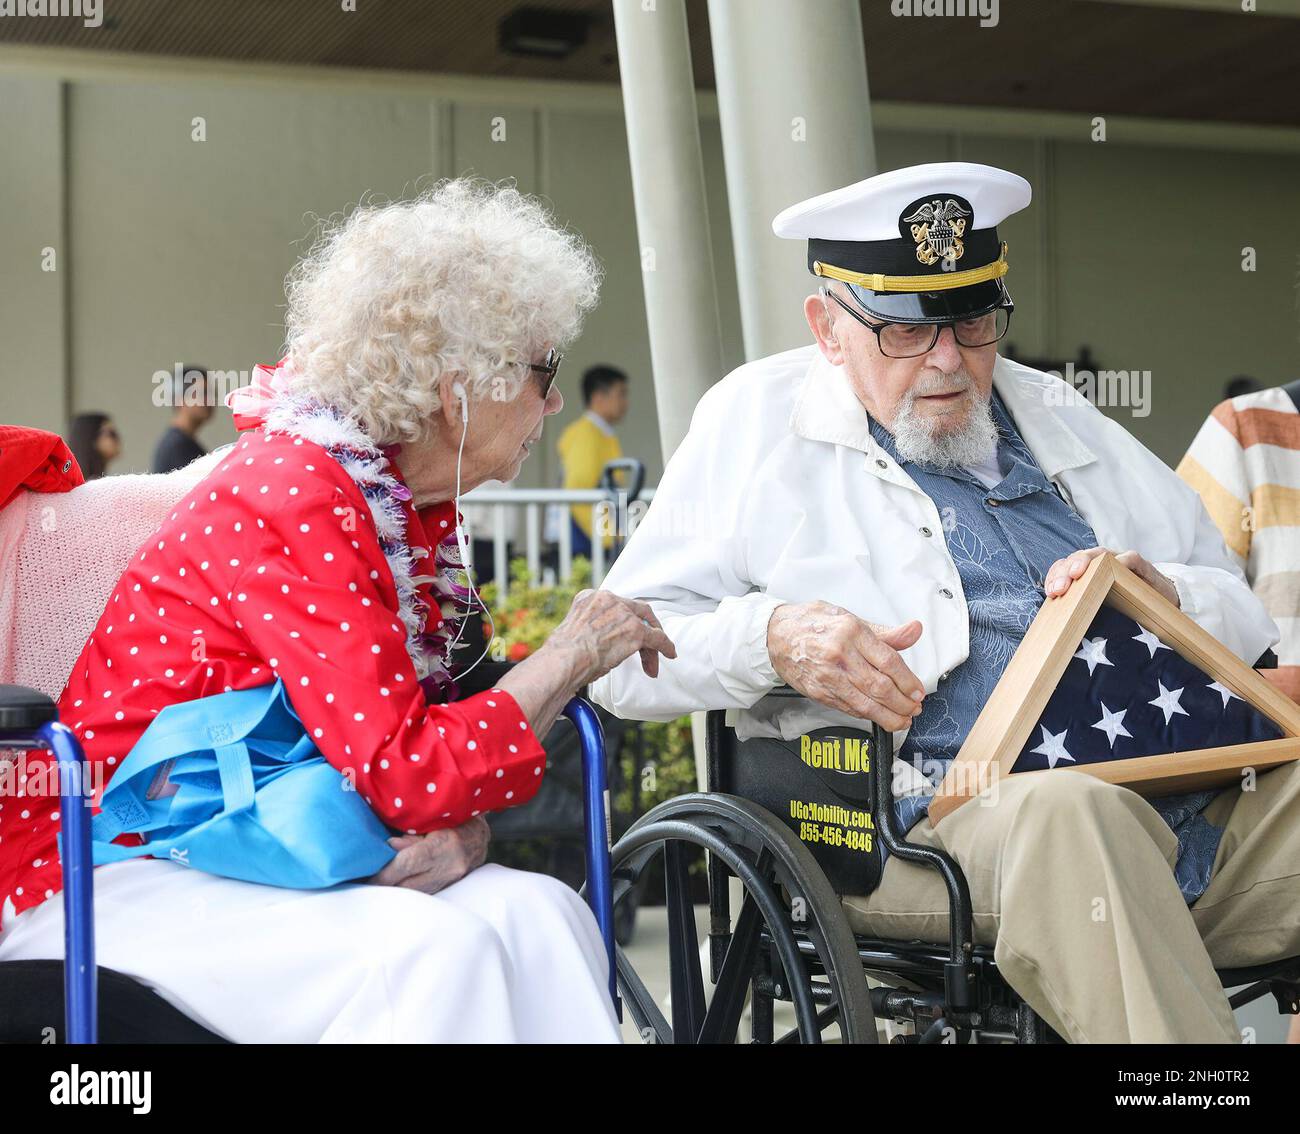 PEARL HARBOR, (Dec. 5, 2022) Former Navy musician’s mate and honorary bandmaster Ira 'Ike' Schaba, shows Rosie the Riveter, Marian Sousa, a flag that was presented during a performance by the U.S. Pacific Fleet Band, which performed for World War II veterans and Pearl Harbor visitors during an 81st Anniversary Pearl Harbor Remembrance concert at the Pearl Harbor Visitor Center. Dec. 7, 2022, marks the 81st year since the attacks on Pearl Harbor and Oahu. The U.S. military, State of Hawaii and National Park Service are hosting a series of remembrance events throughout the week to honor the cour Stock Photo